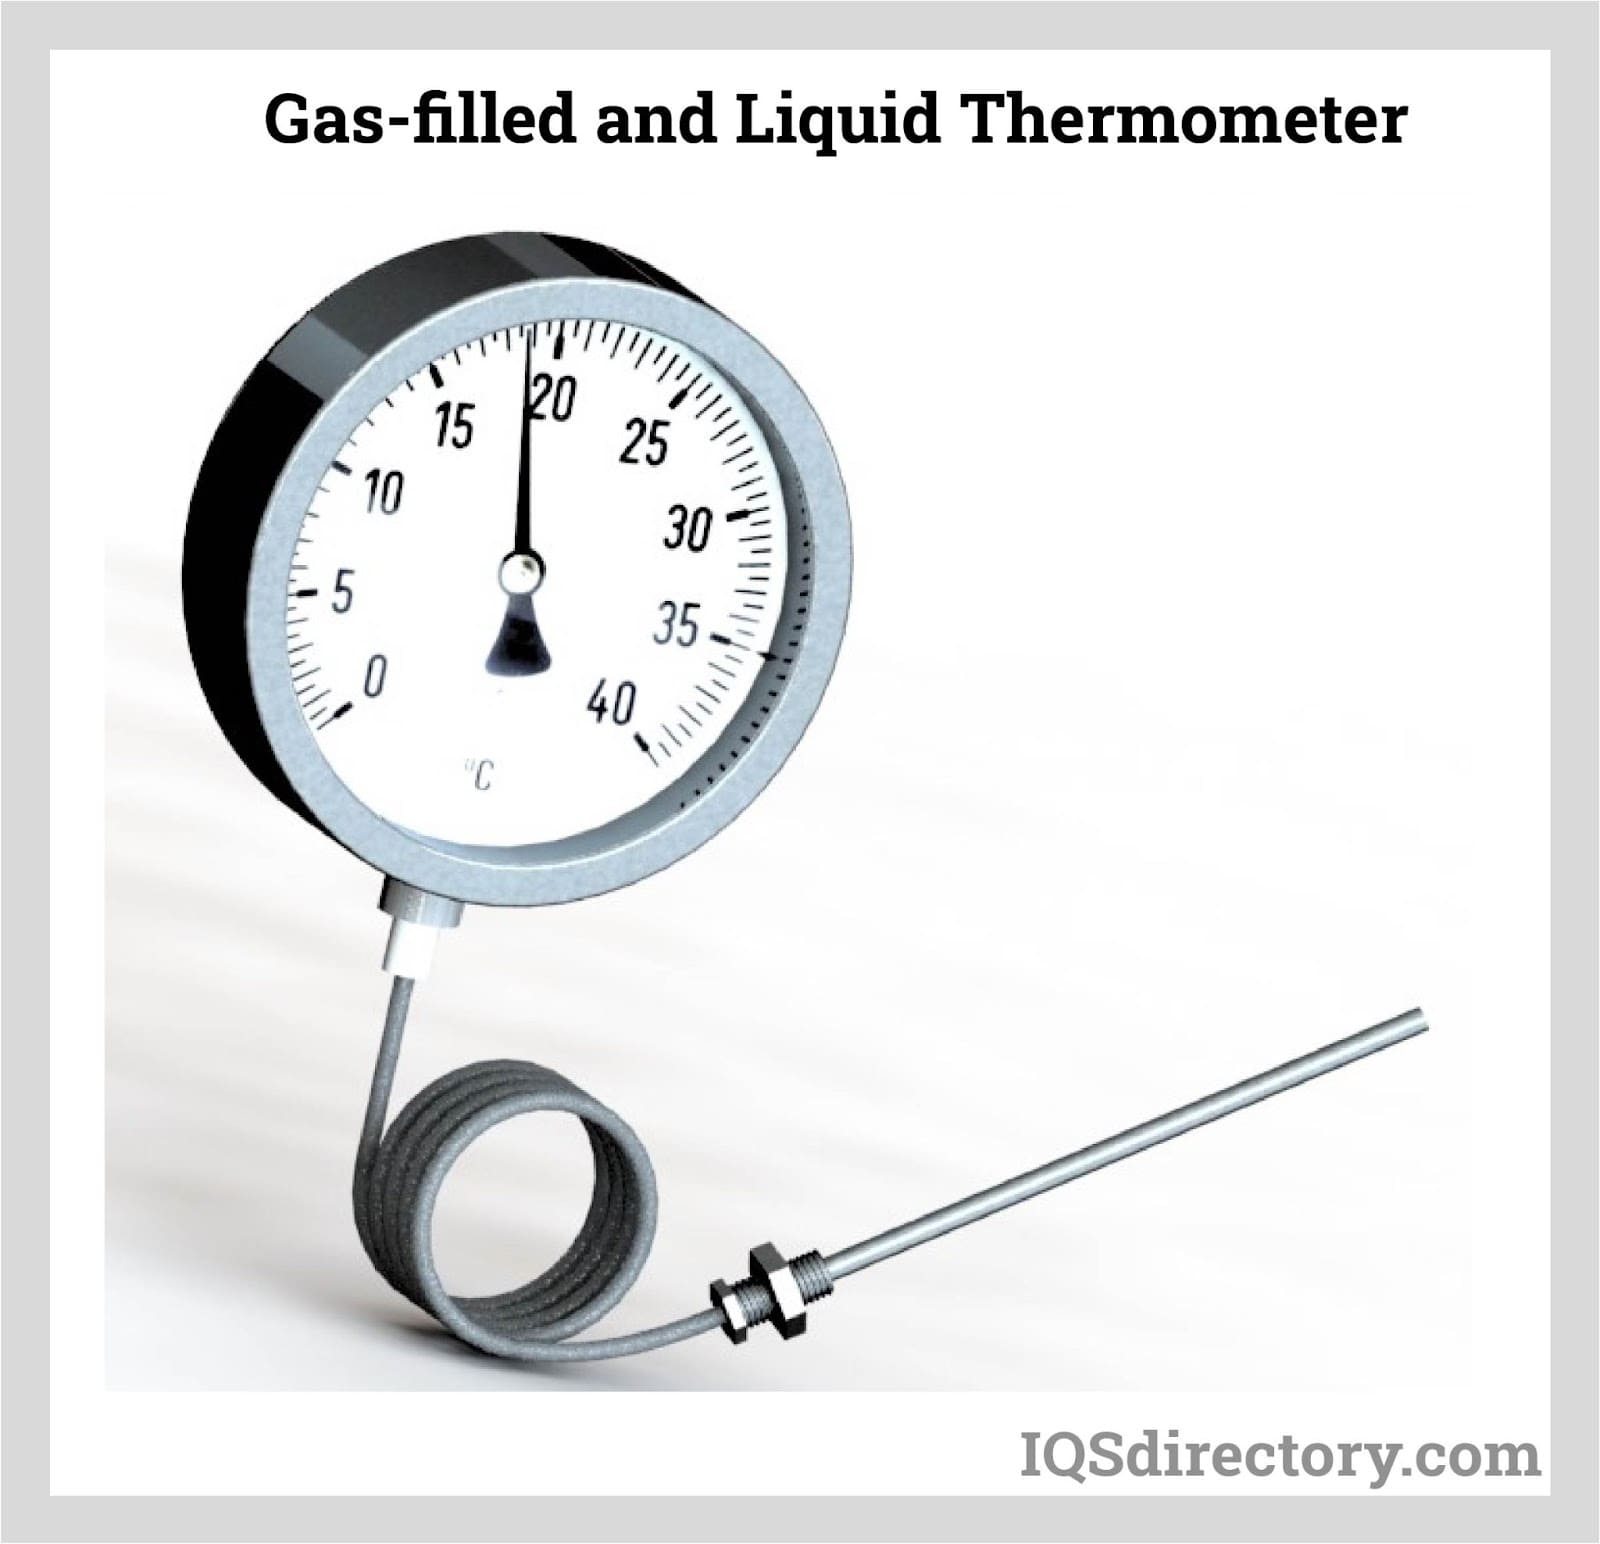 Gas-filled and Liquid Thermometer